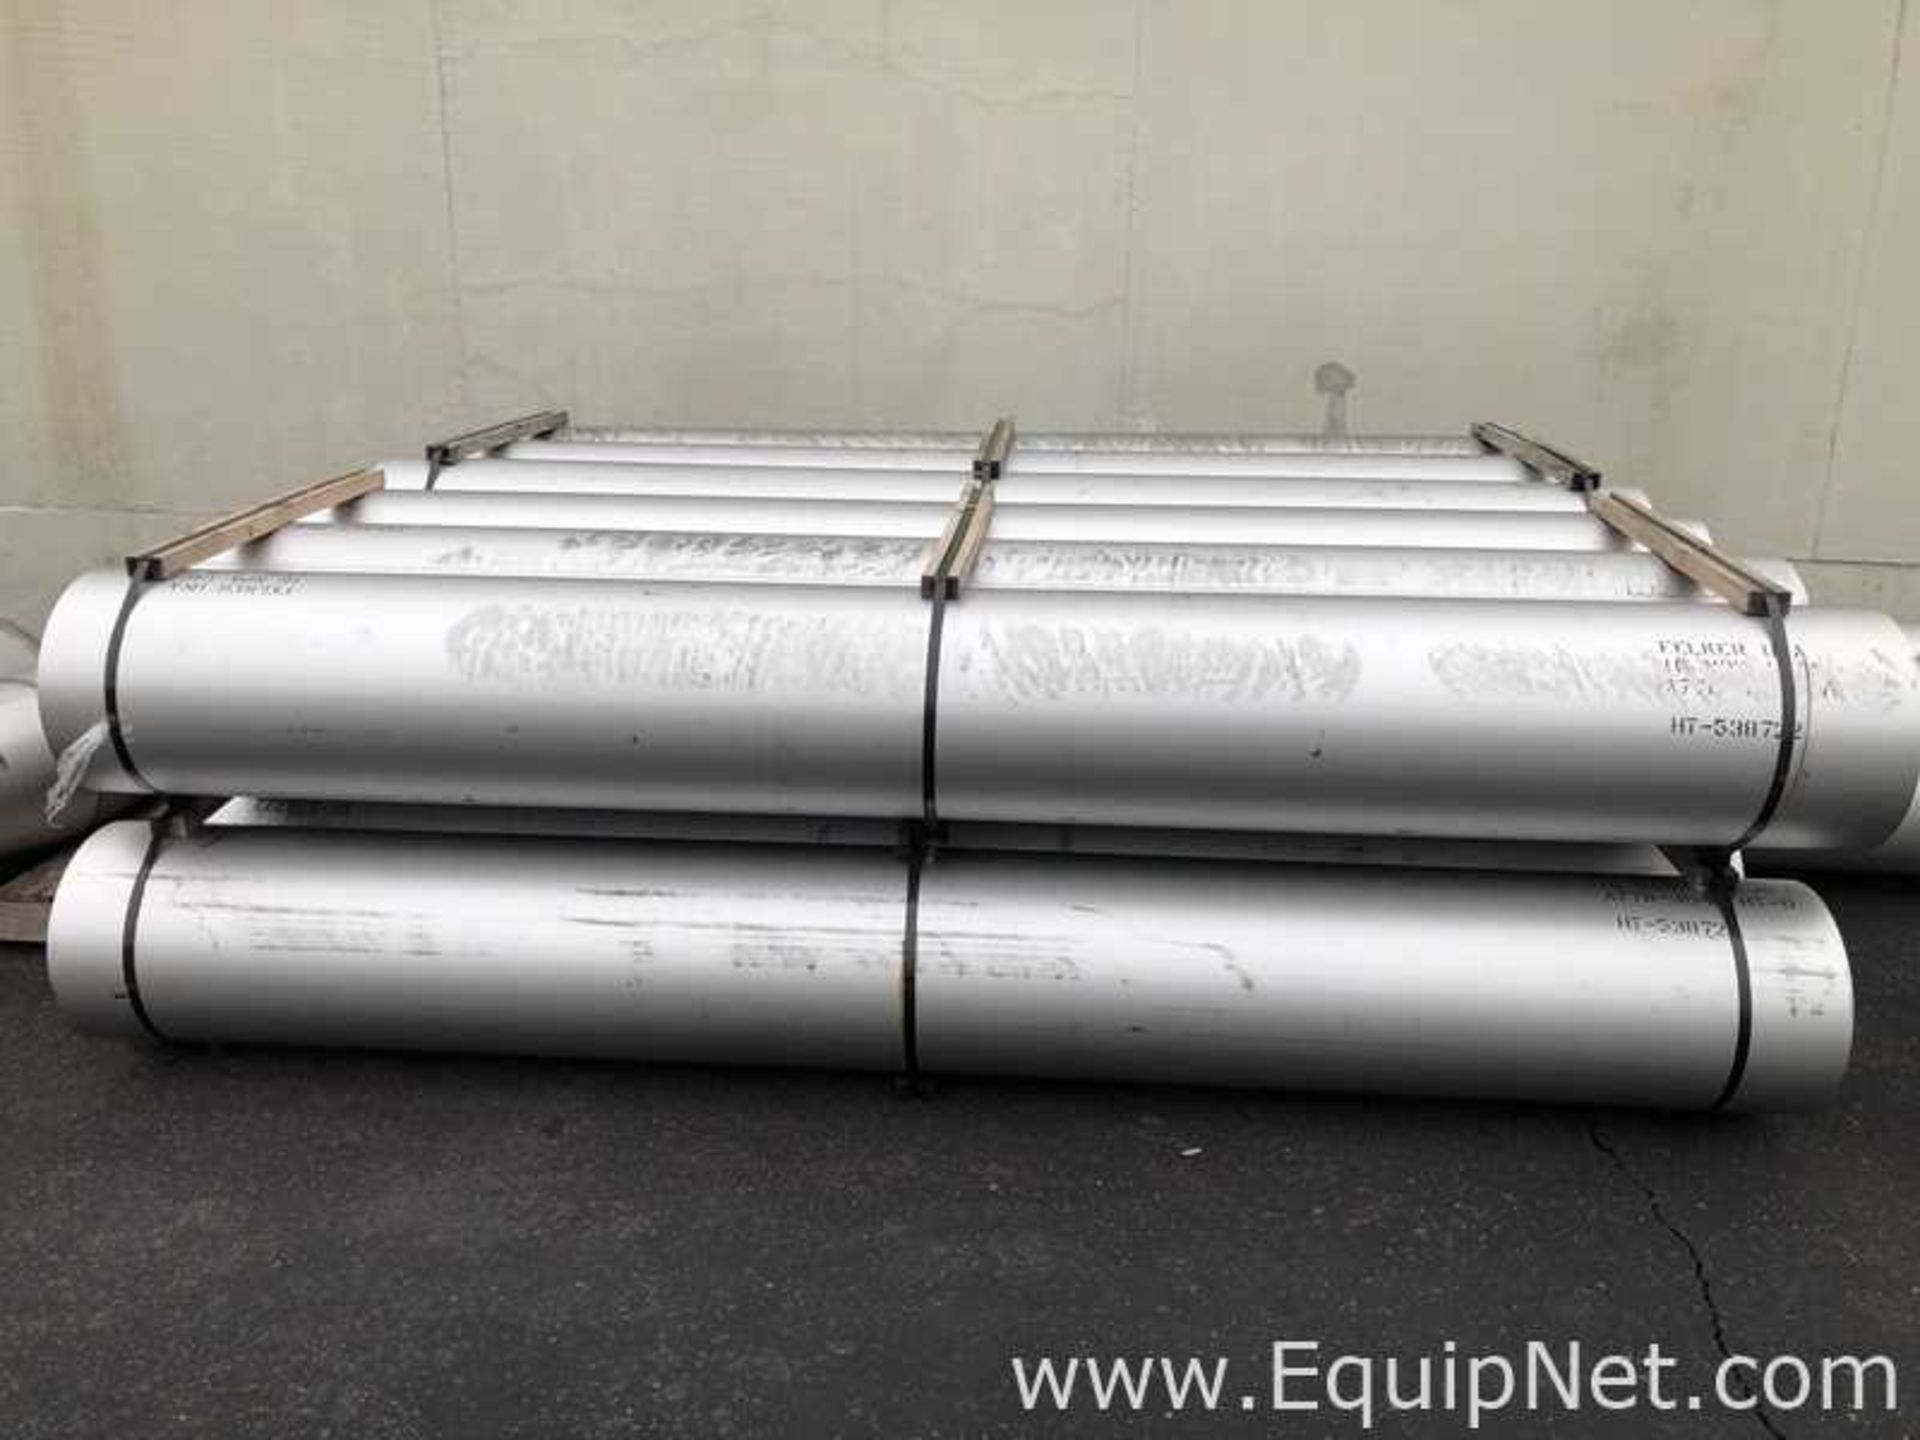 Lot Of Approx 15 Stainless Steel 304L Piping 16in diam X 150in Length Sections And Semi Elbows - Image 6 of 12